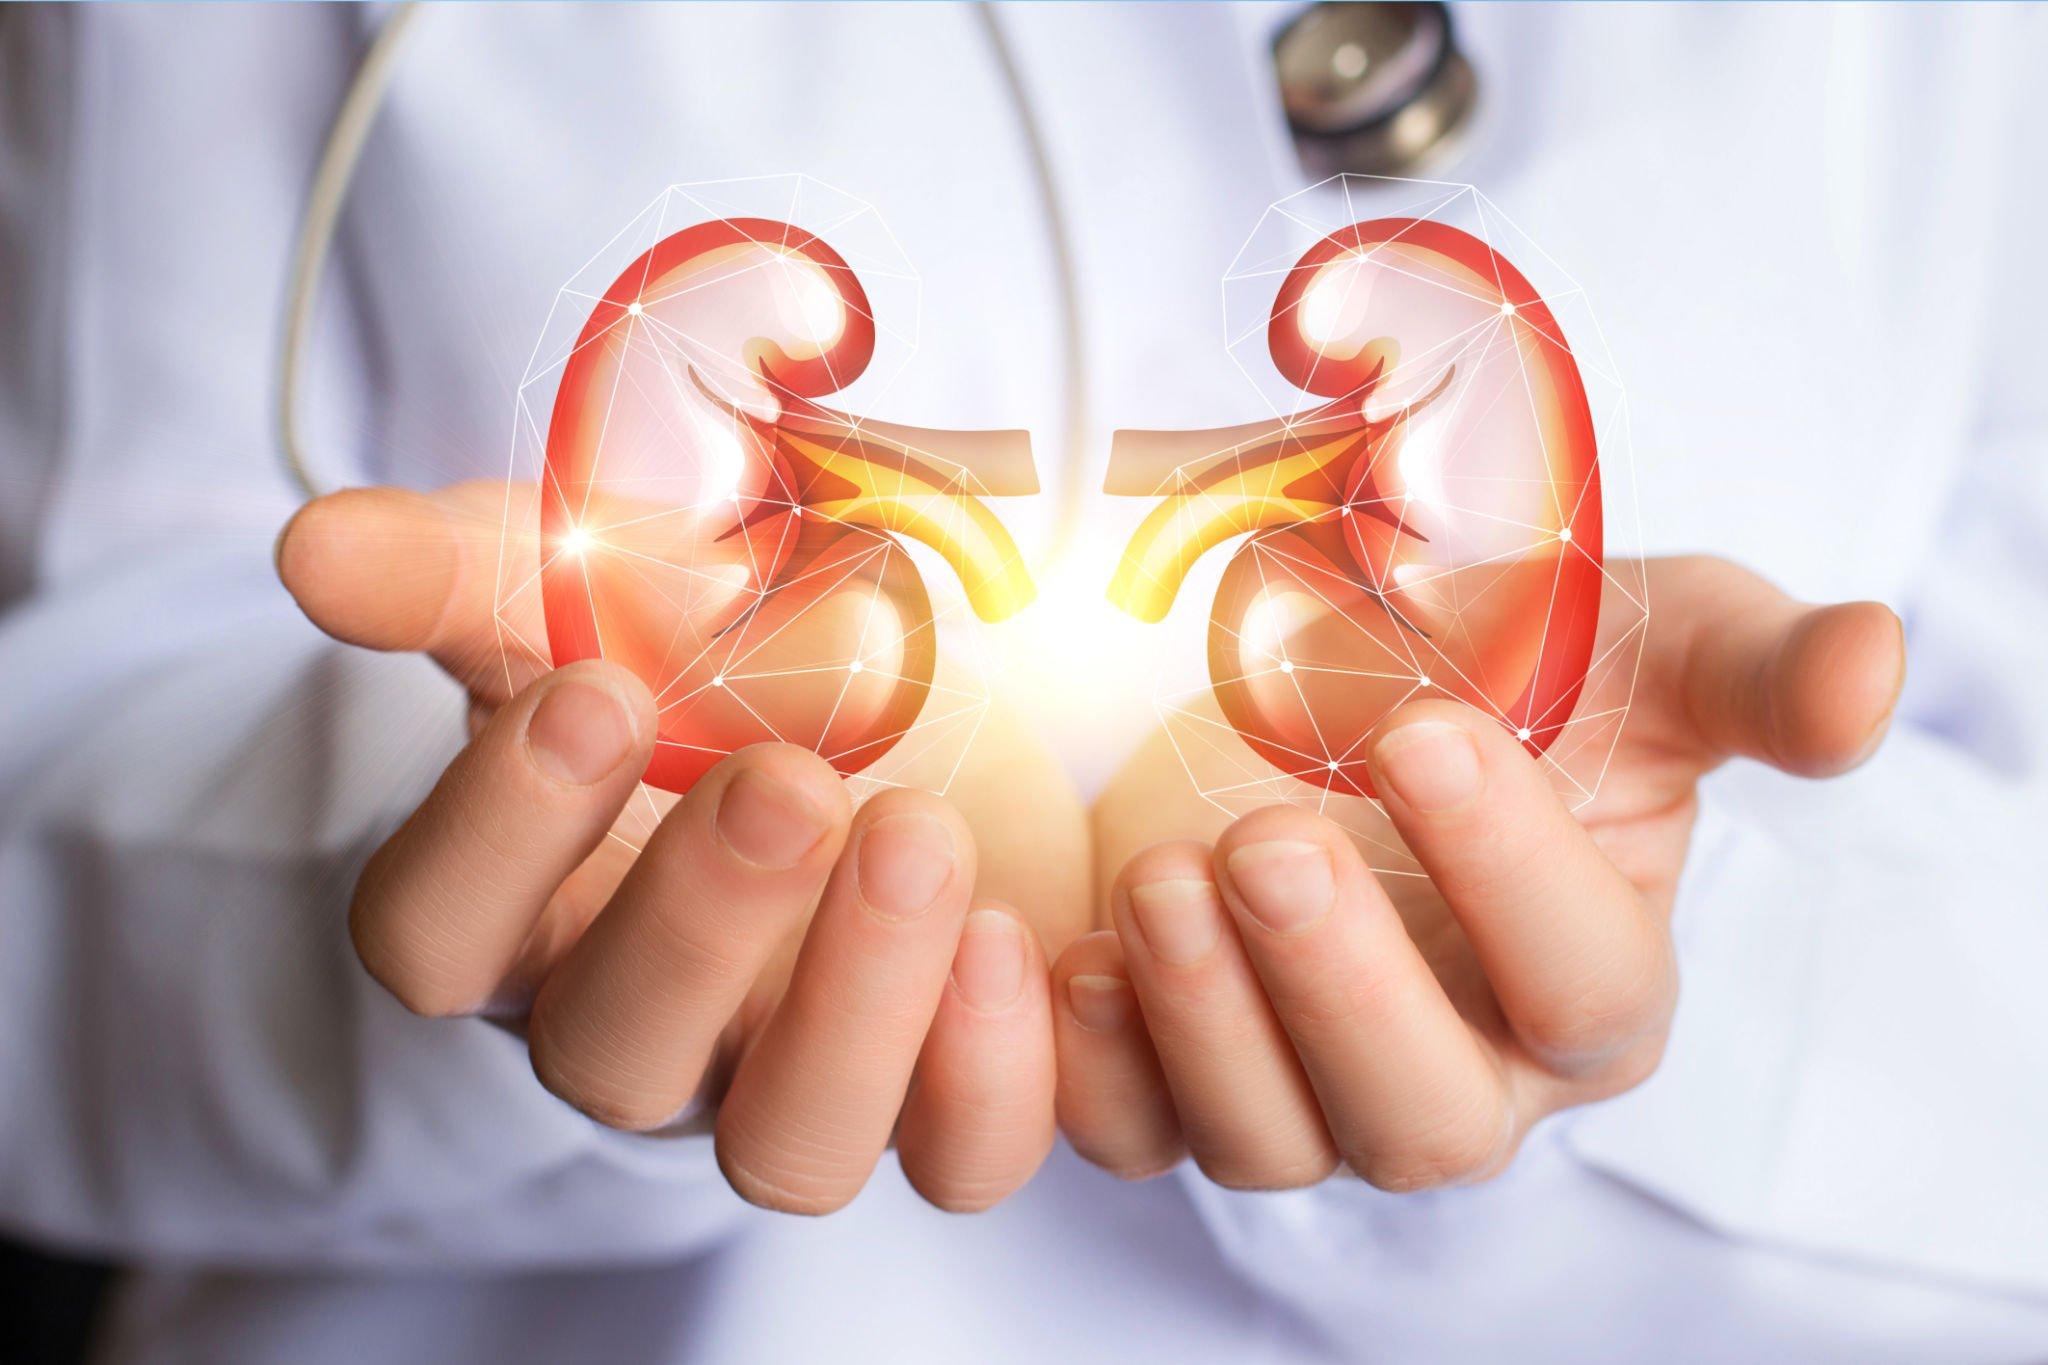 How to Take Care of Your Transplanted Kidney